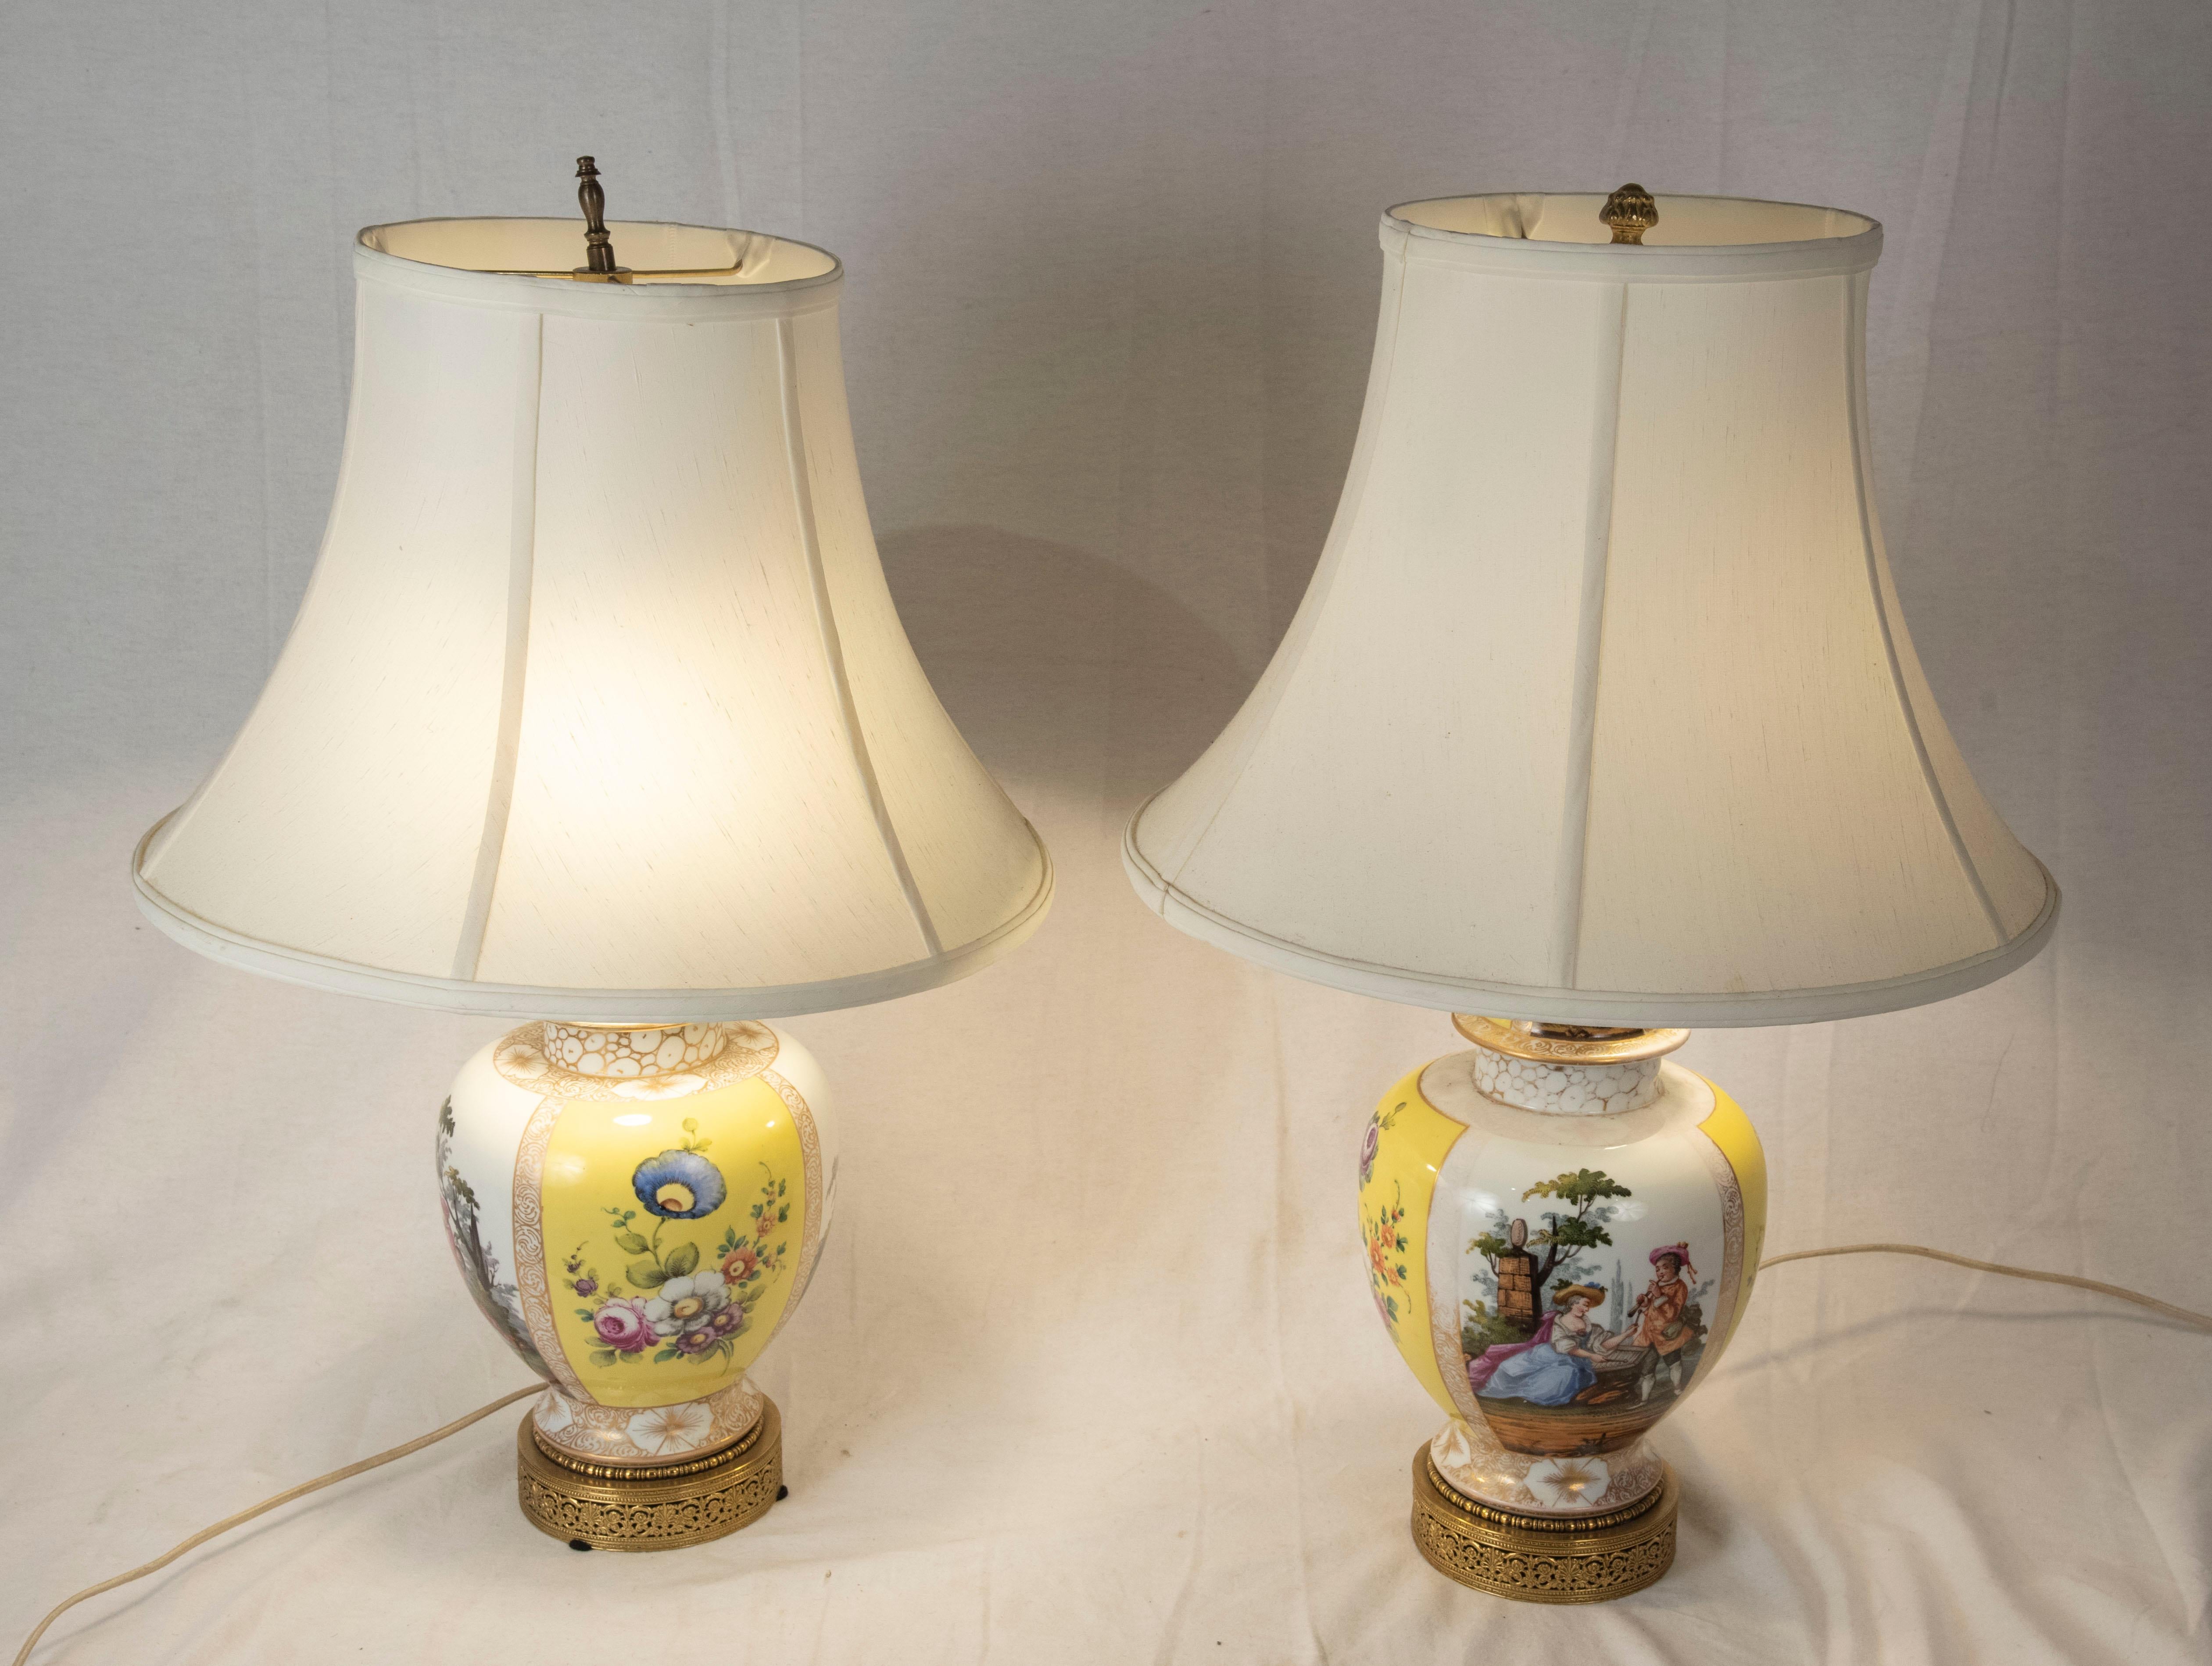 Pair of Lamped Japanese Arita Baluster Vases with Ormolu Mounts, circa 1910 In Good Condition For Sale In Salt Lake City, UT